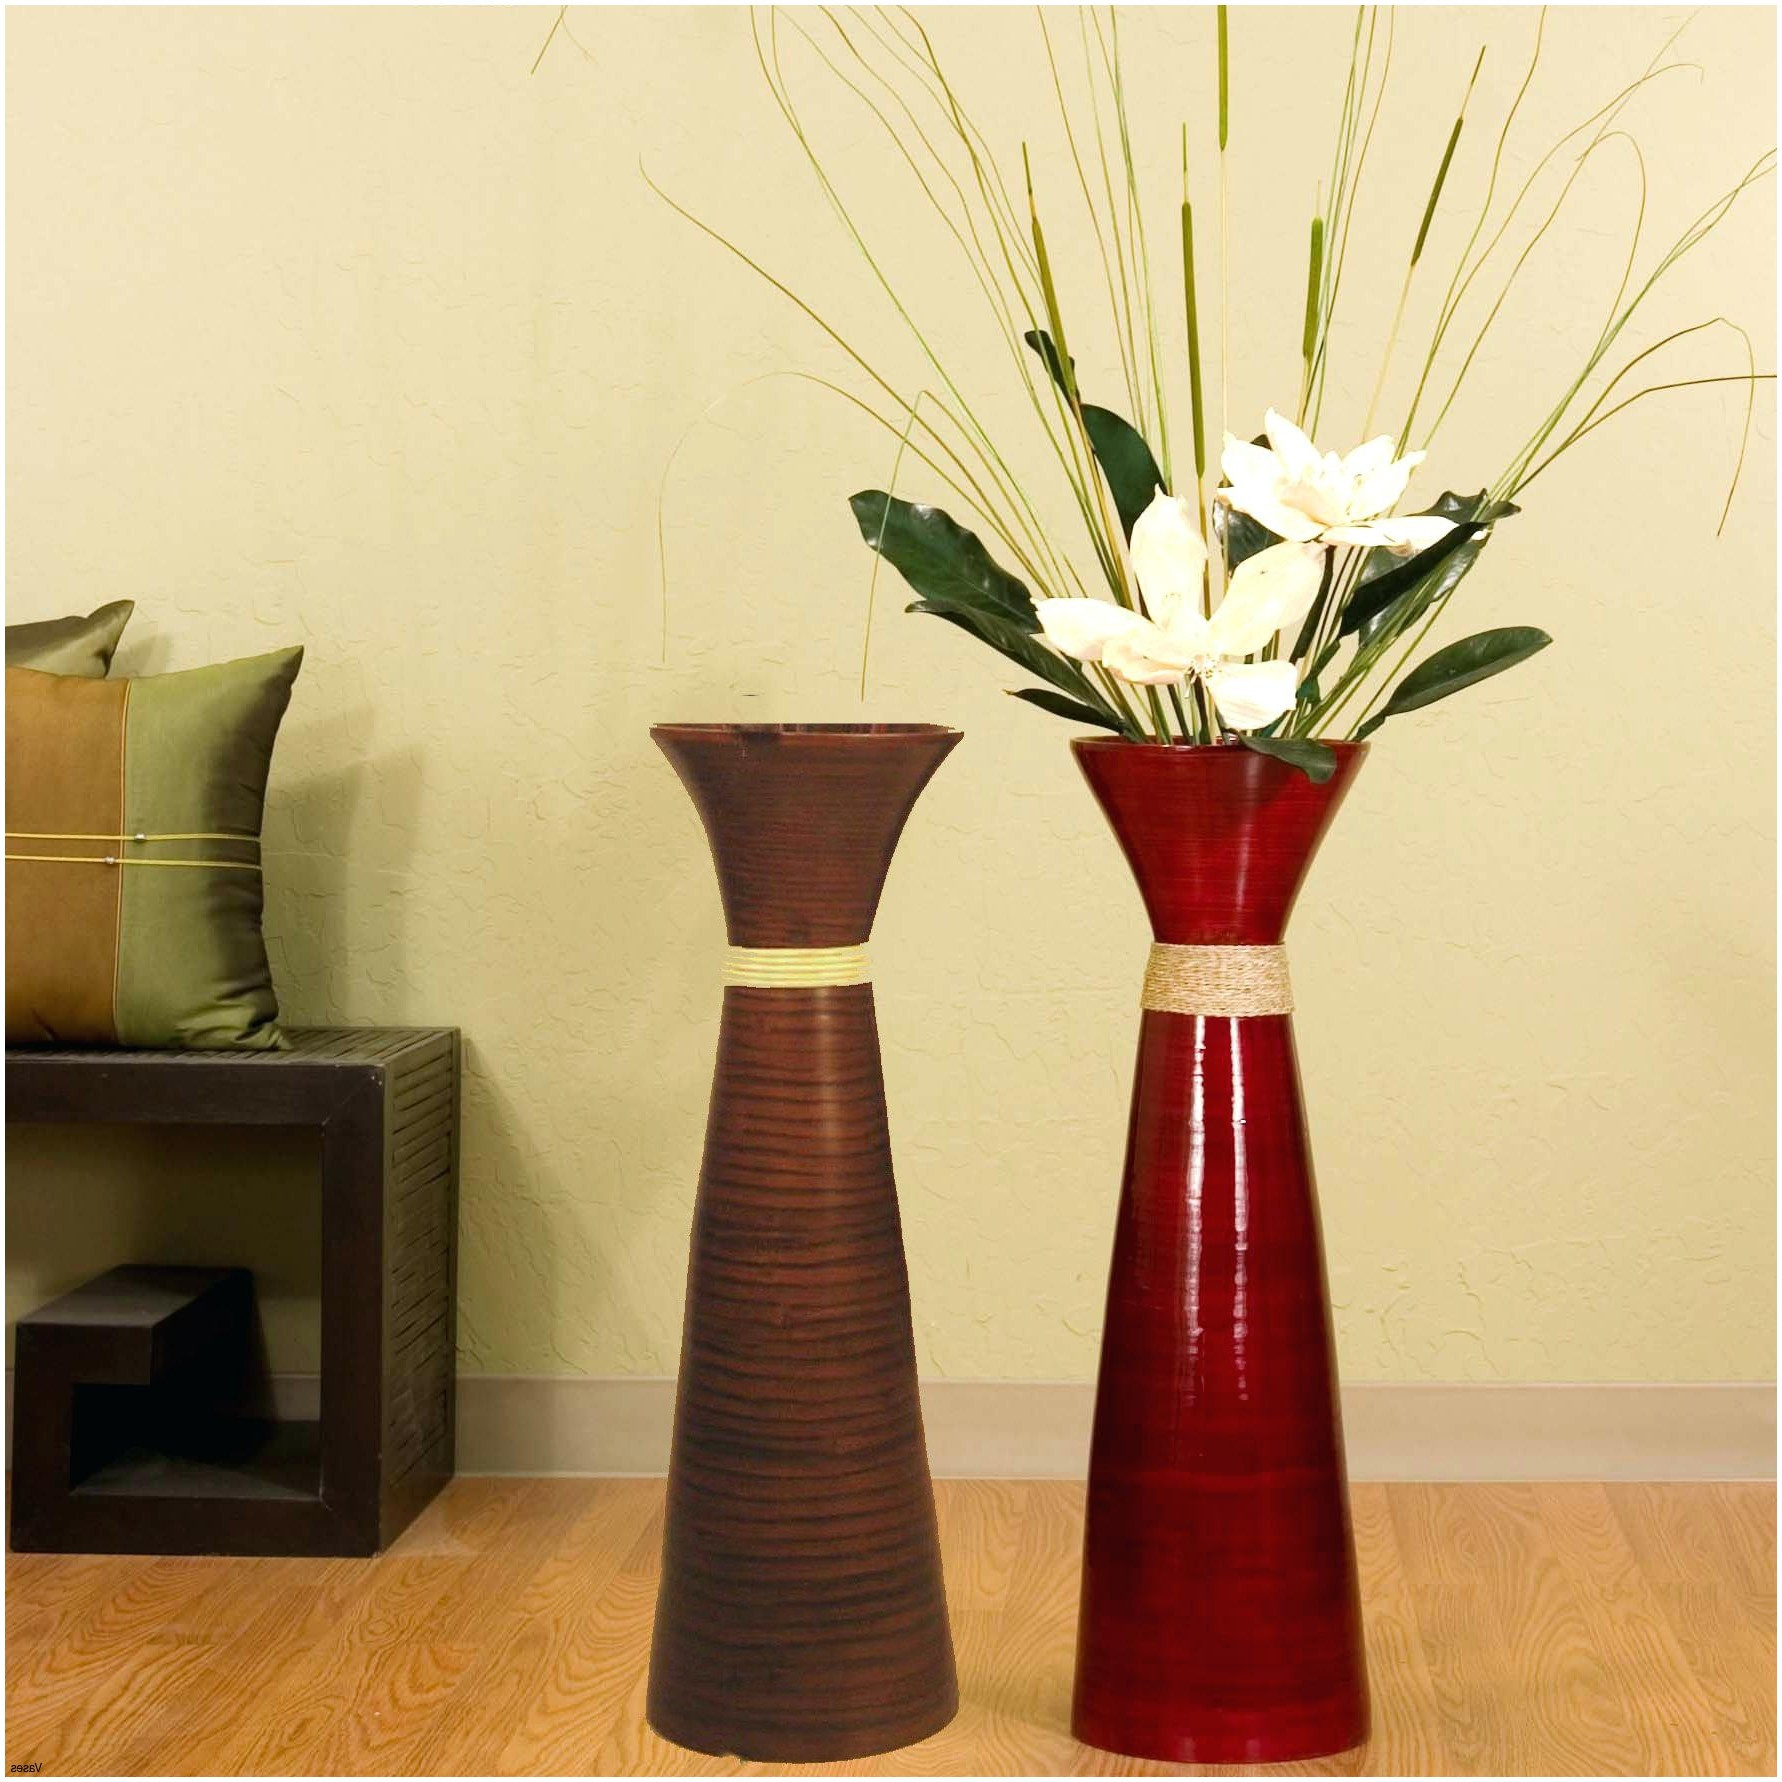 10 Fantastic Tall Sticks for Floor Vases 2024 free download tall sticks for floor vases of 27ac289lagant led decoration anciendemutu org within floor decor vase tall ideash vases fill a substantial with arrangement led branches it s another